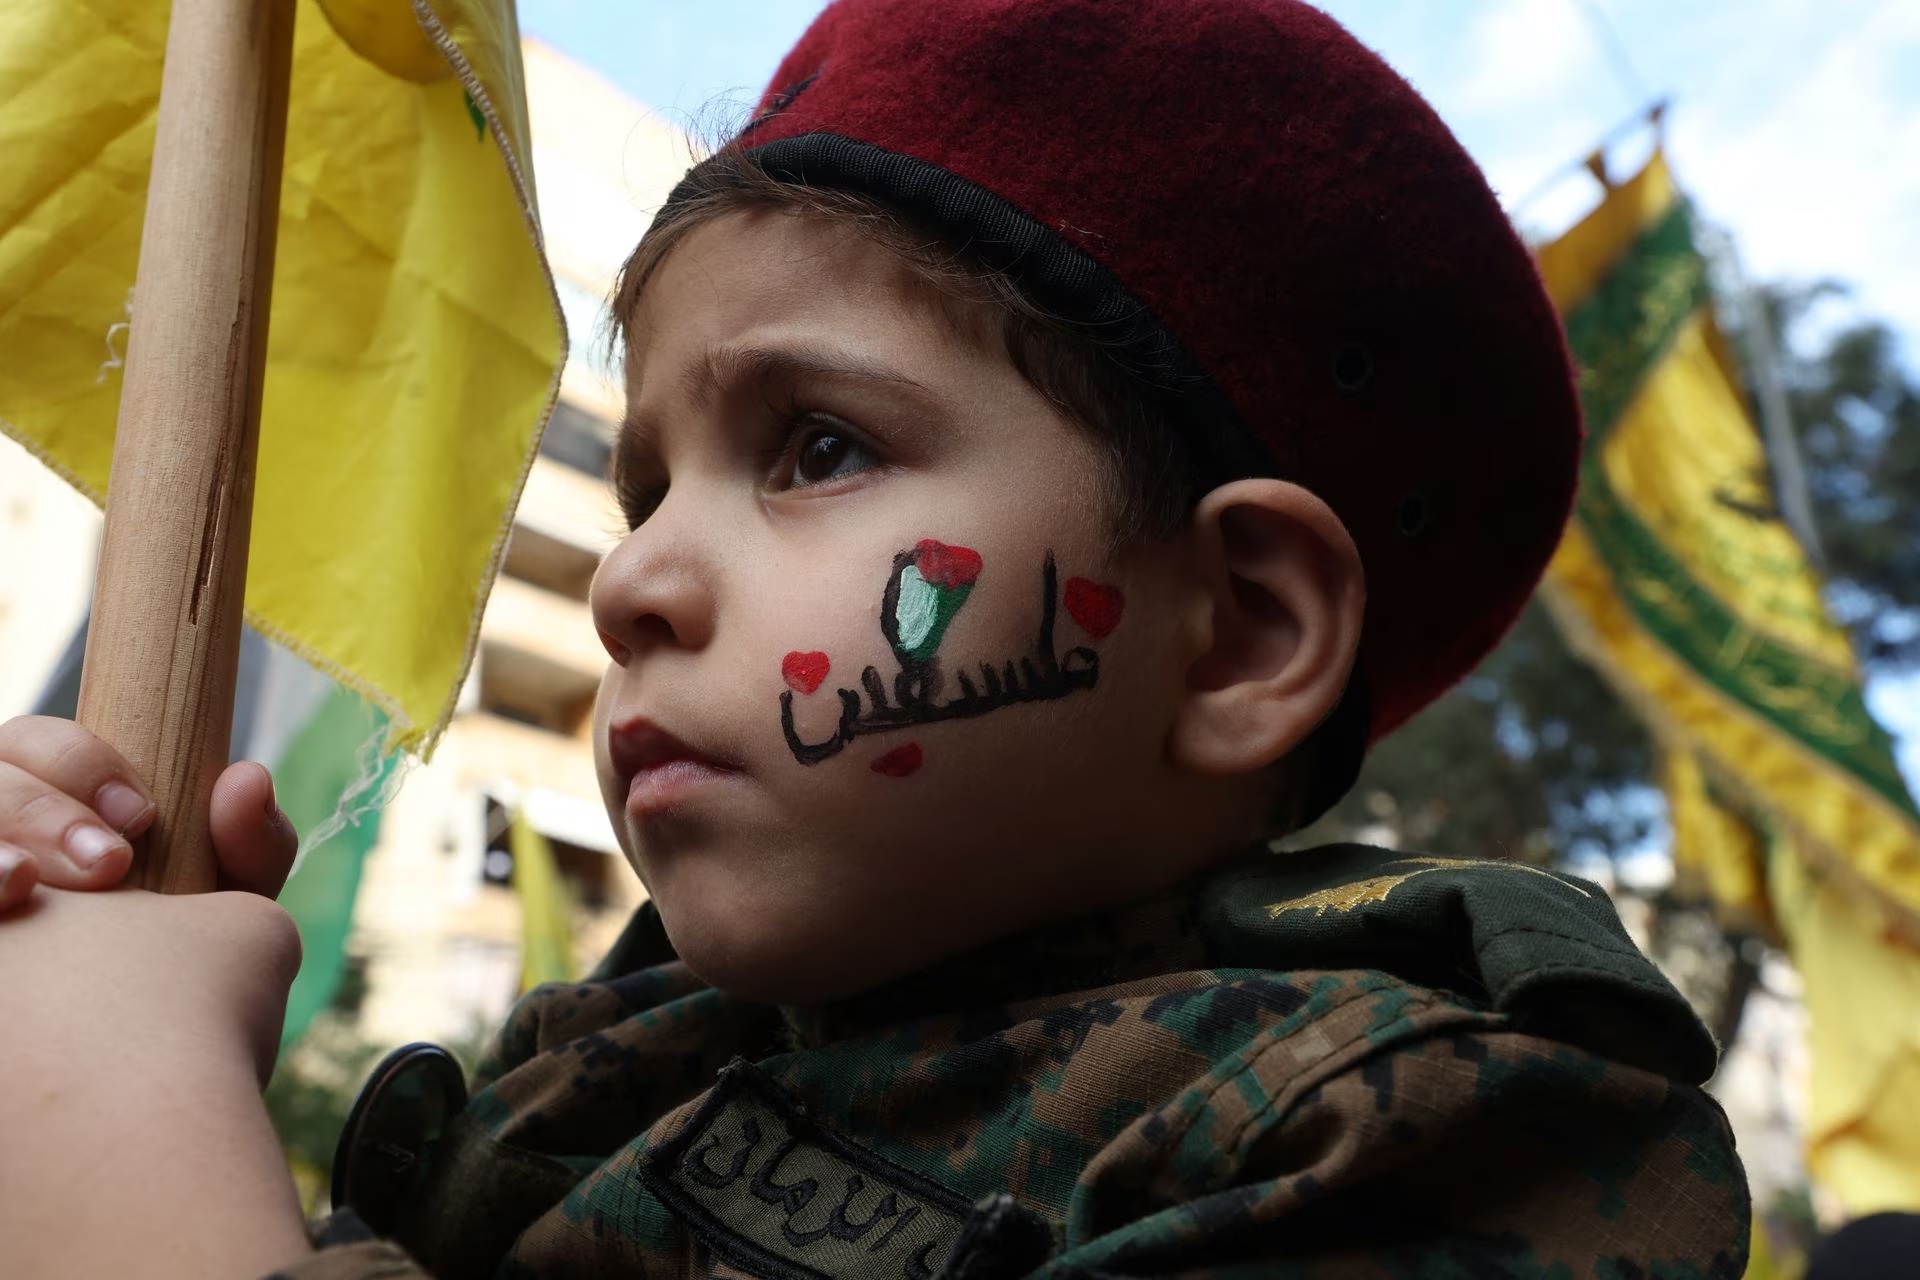 A boy holds a flag as Hezbollah supporters attend a protest, after hundreds of Palestinians were killed in an Israeli blast at Al-Ahli hospital in Gaza.